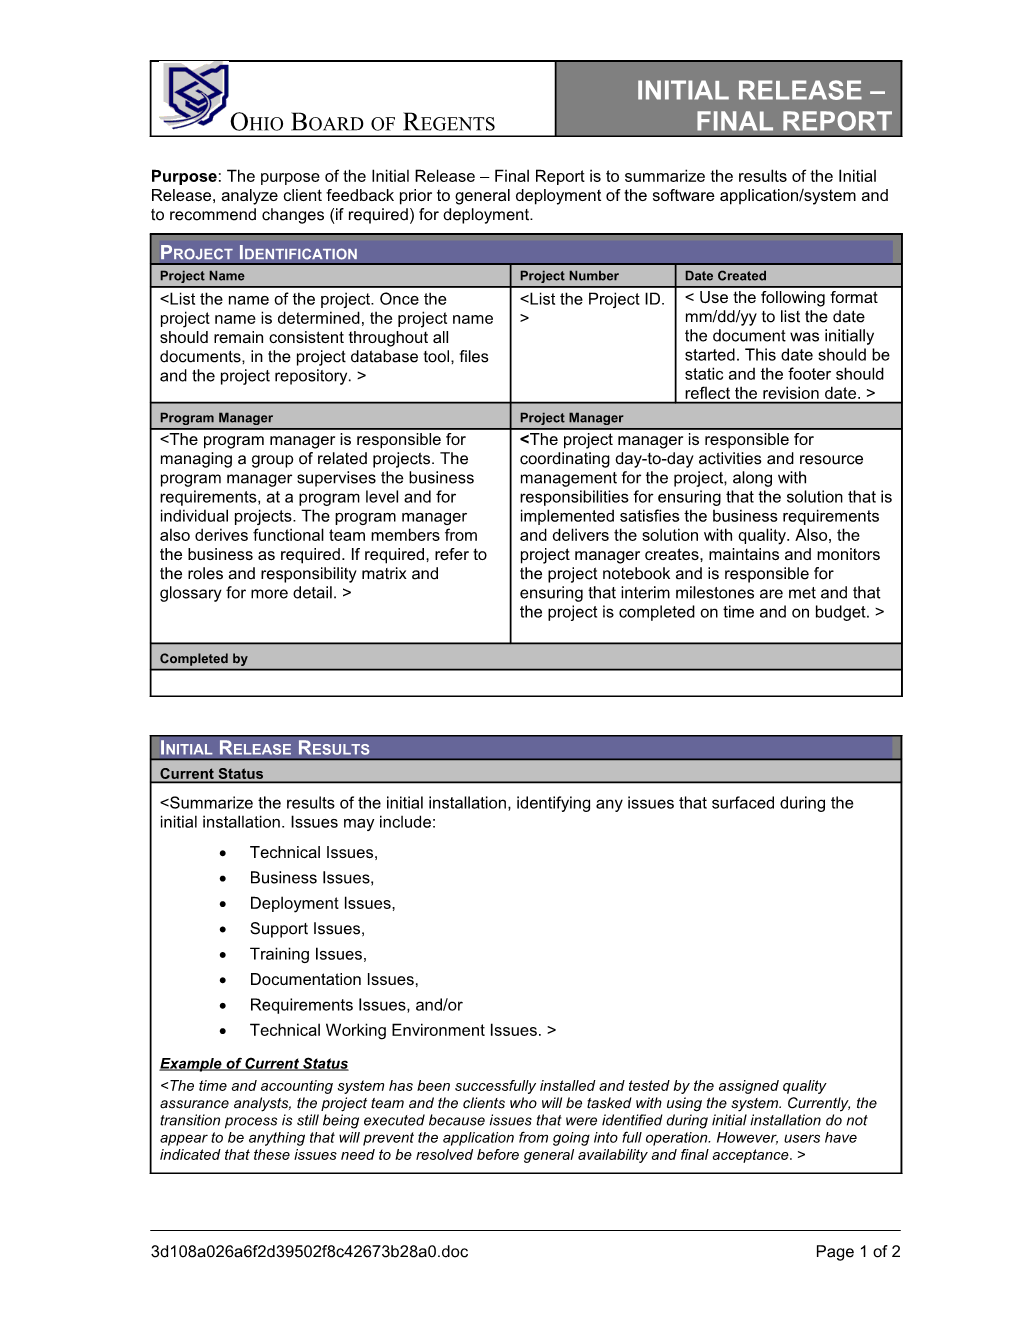 Initial Release Final Report Template